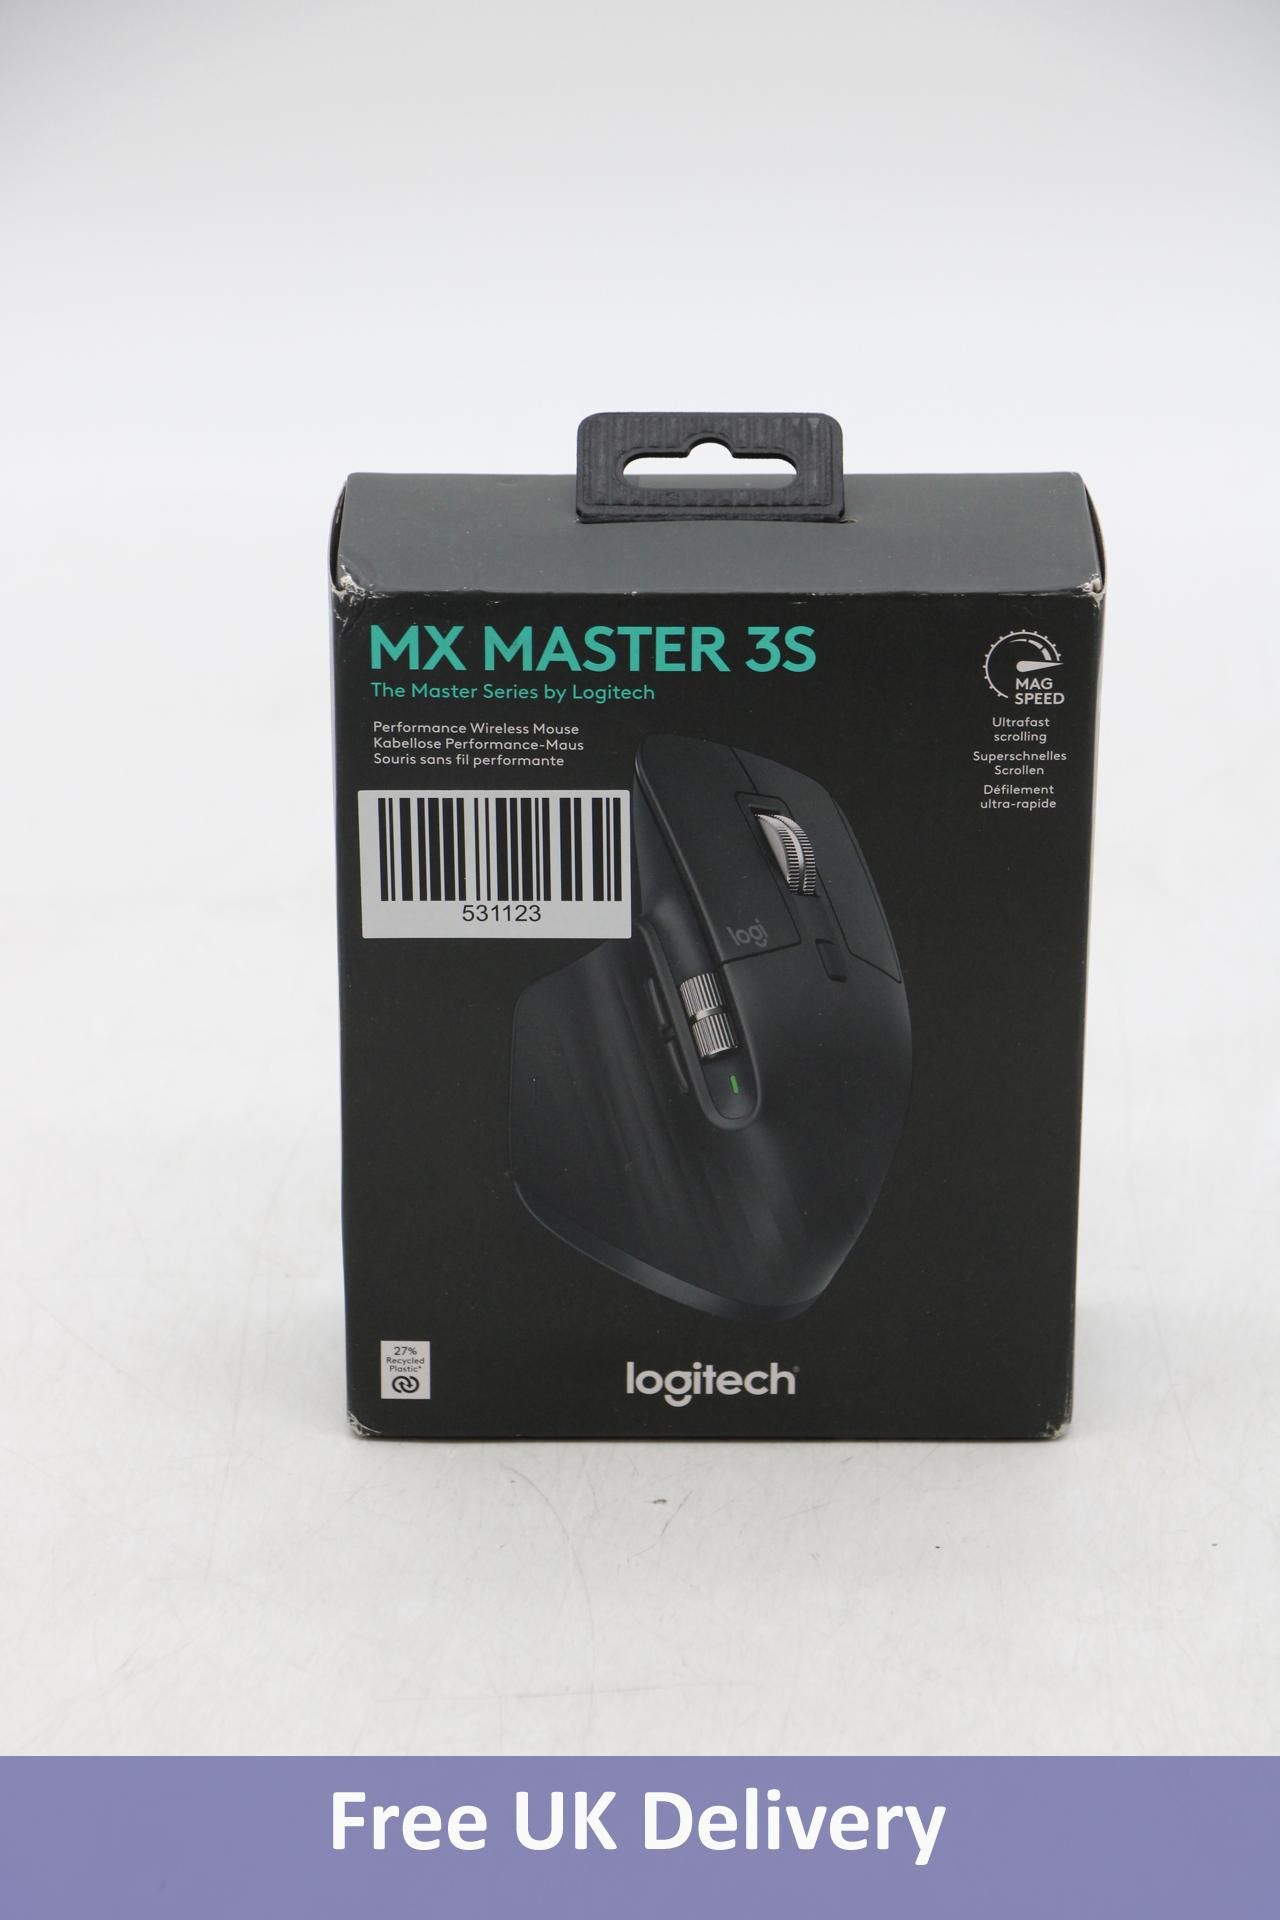 Logitech MX Master 3S Wireless Performance Mouse with Ultra-Fast Scrolling, Dark Grey